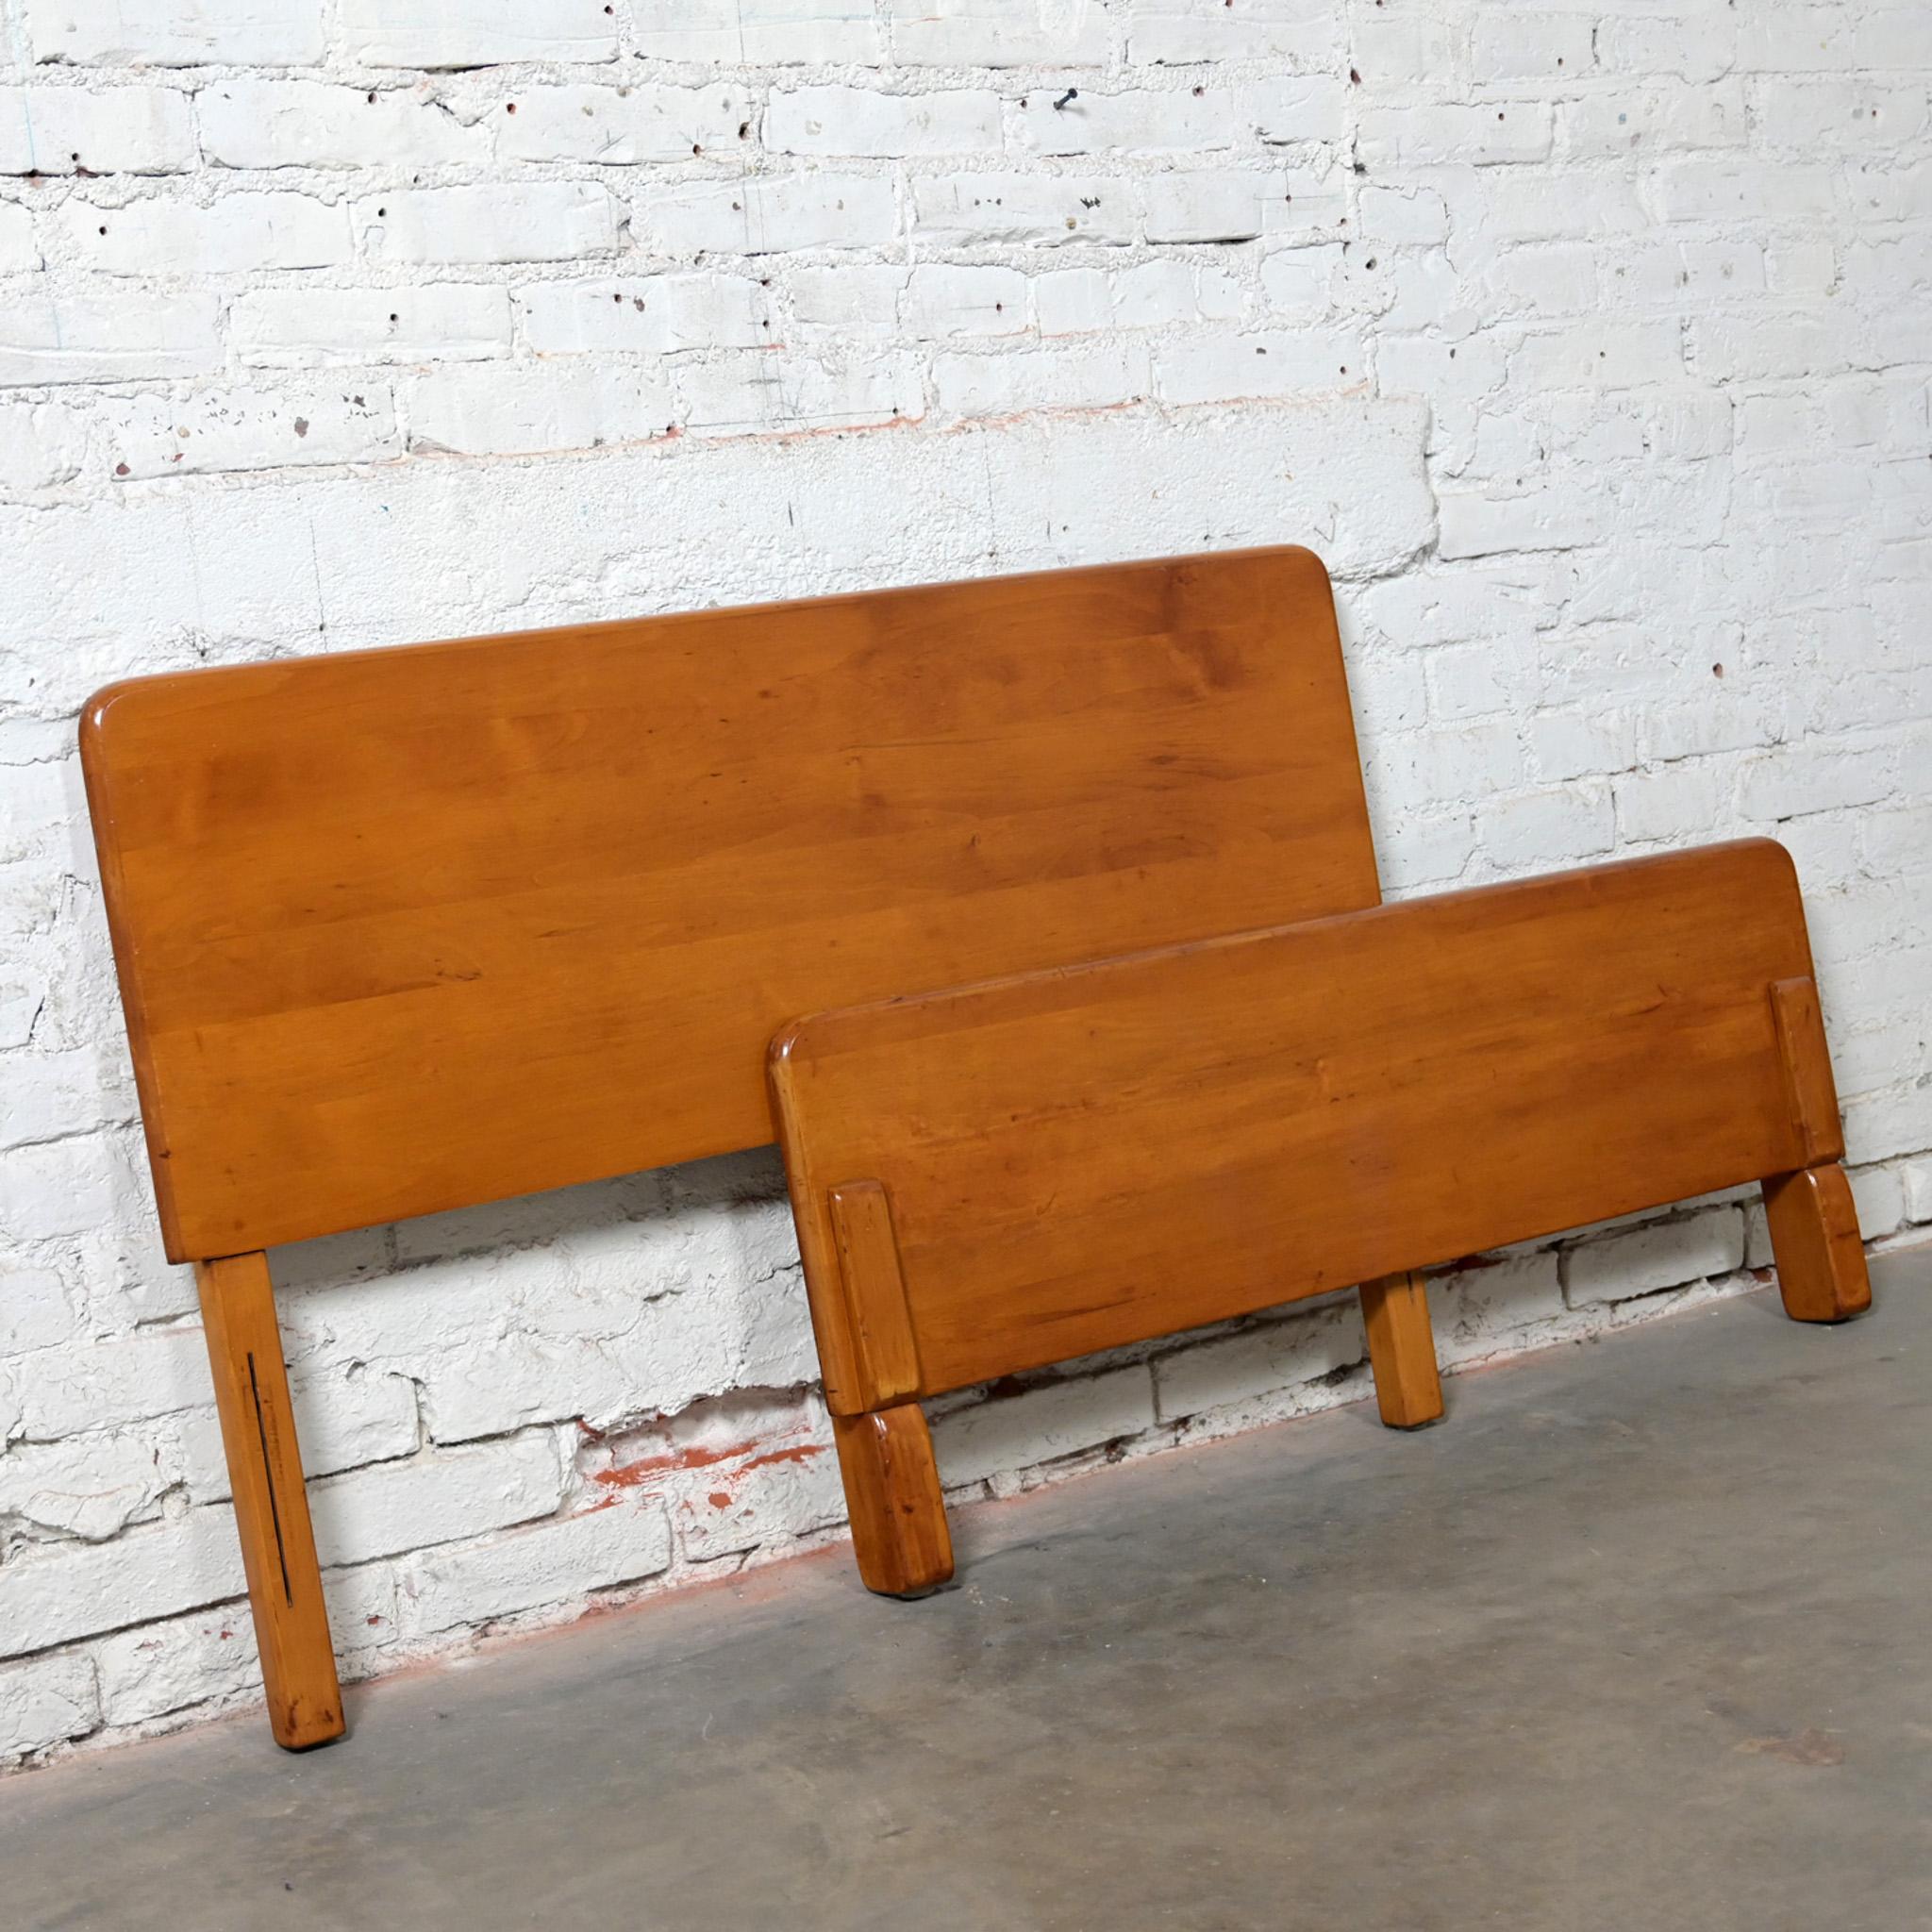 Early-Mid-20th Century Art Moderne Maple Twin Bed Headboard & Footboard  In Good Condition For Sale In Topeka, KS